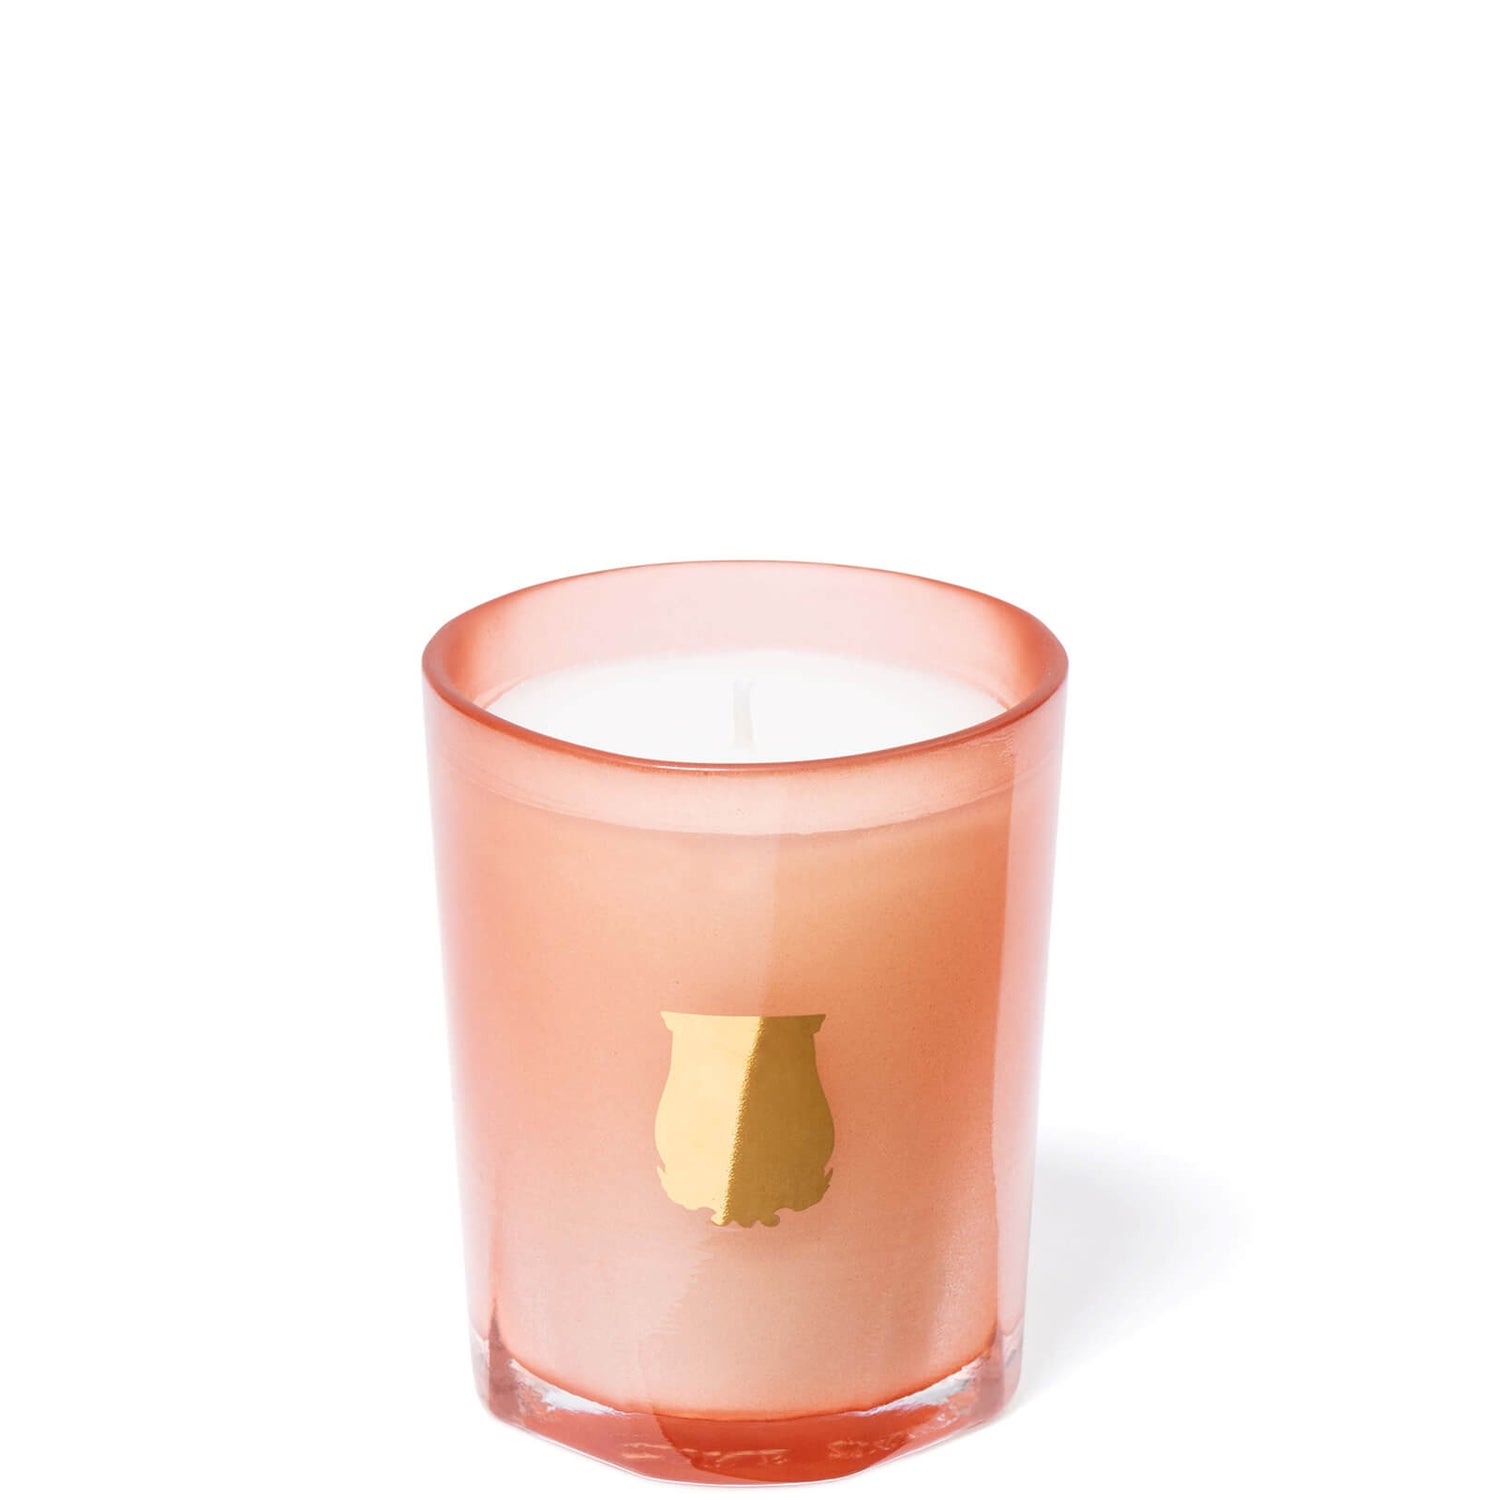 TRUDON Scented Candle 70g - Tuileries